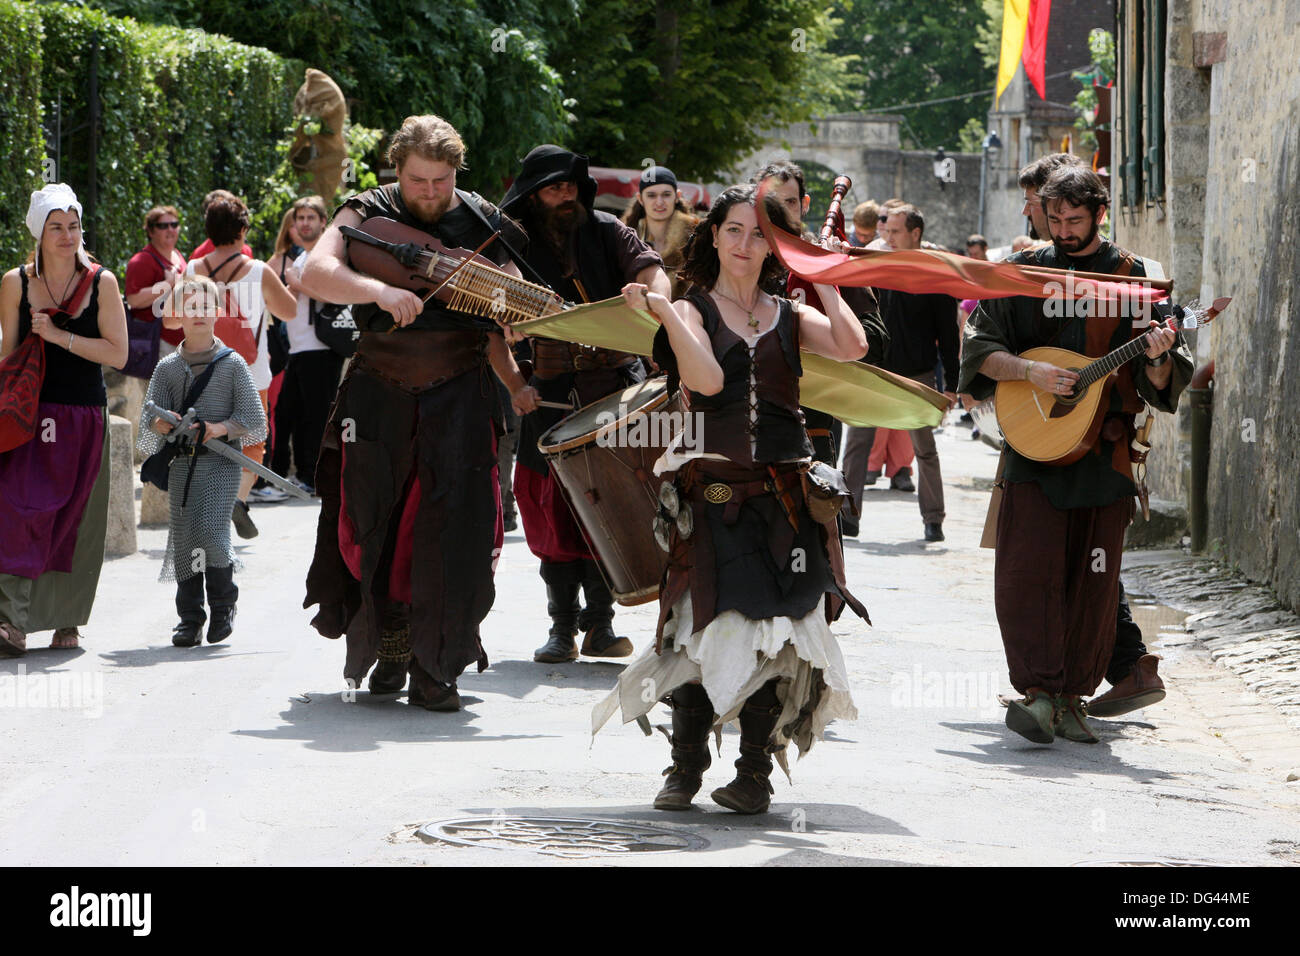 Acrobats in the Costume Parade during the medieval festival of Provins, UNESCO World Heritage Site, Seine-et-Marne, France Stock Photo